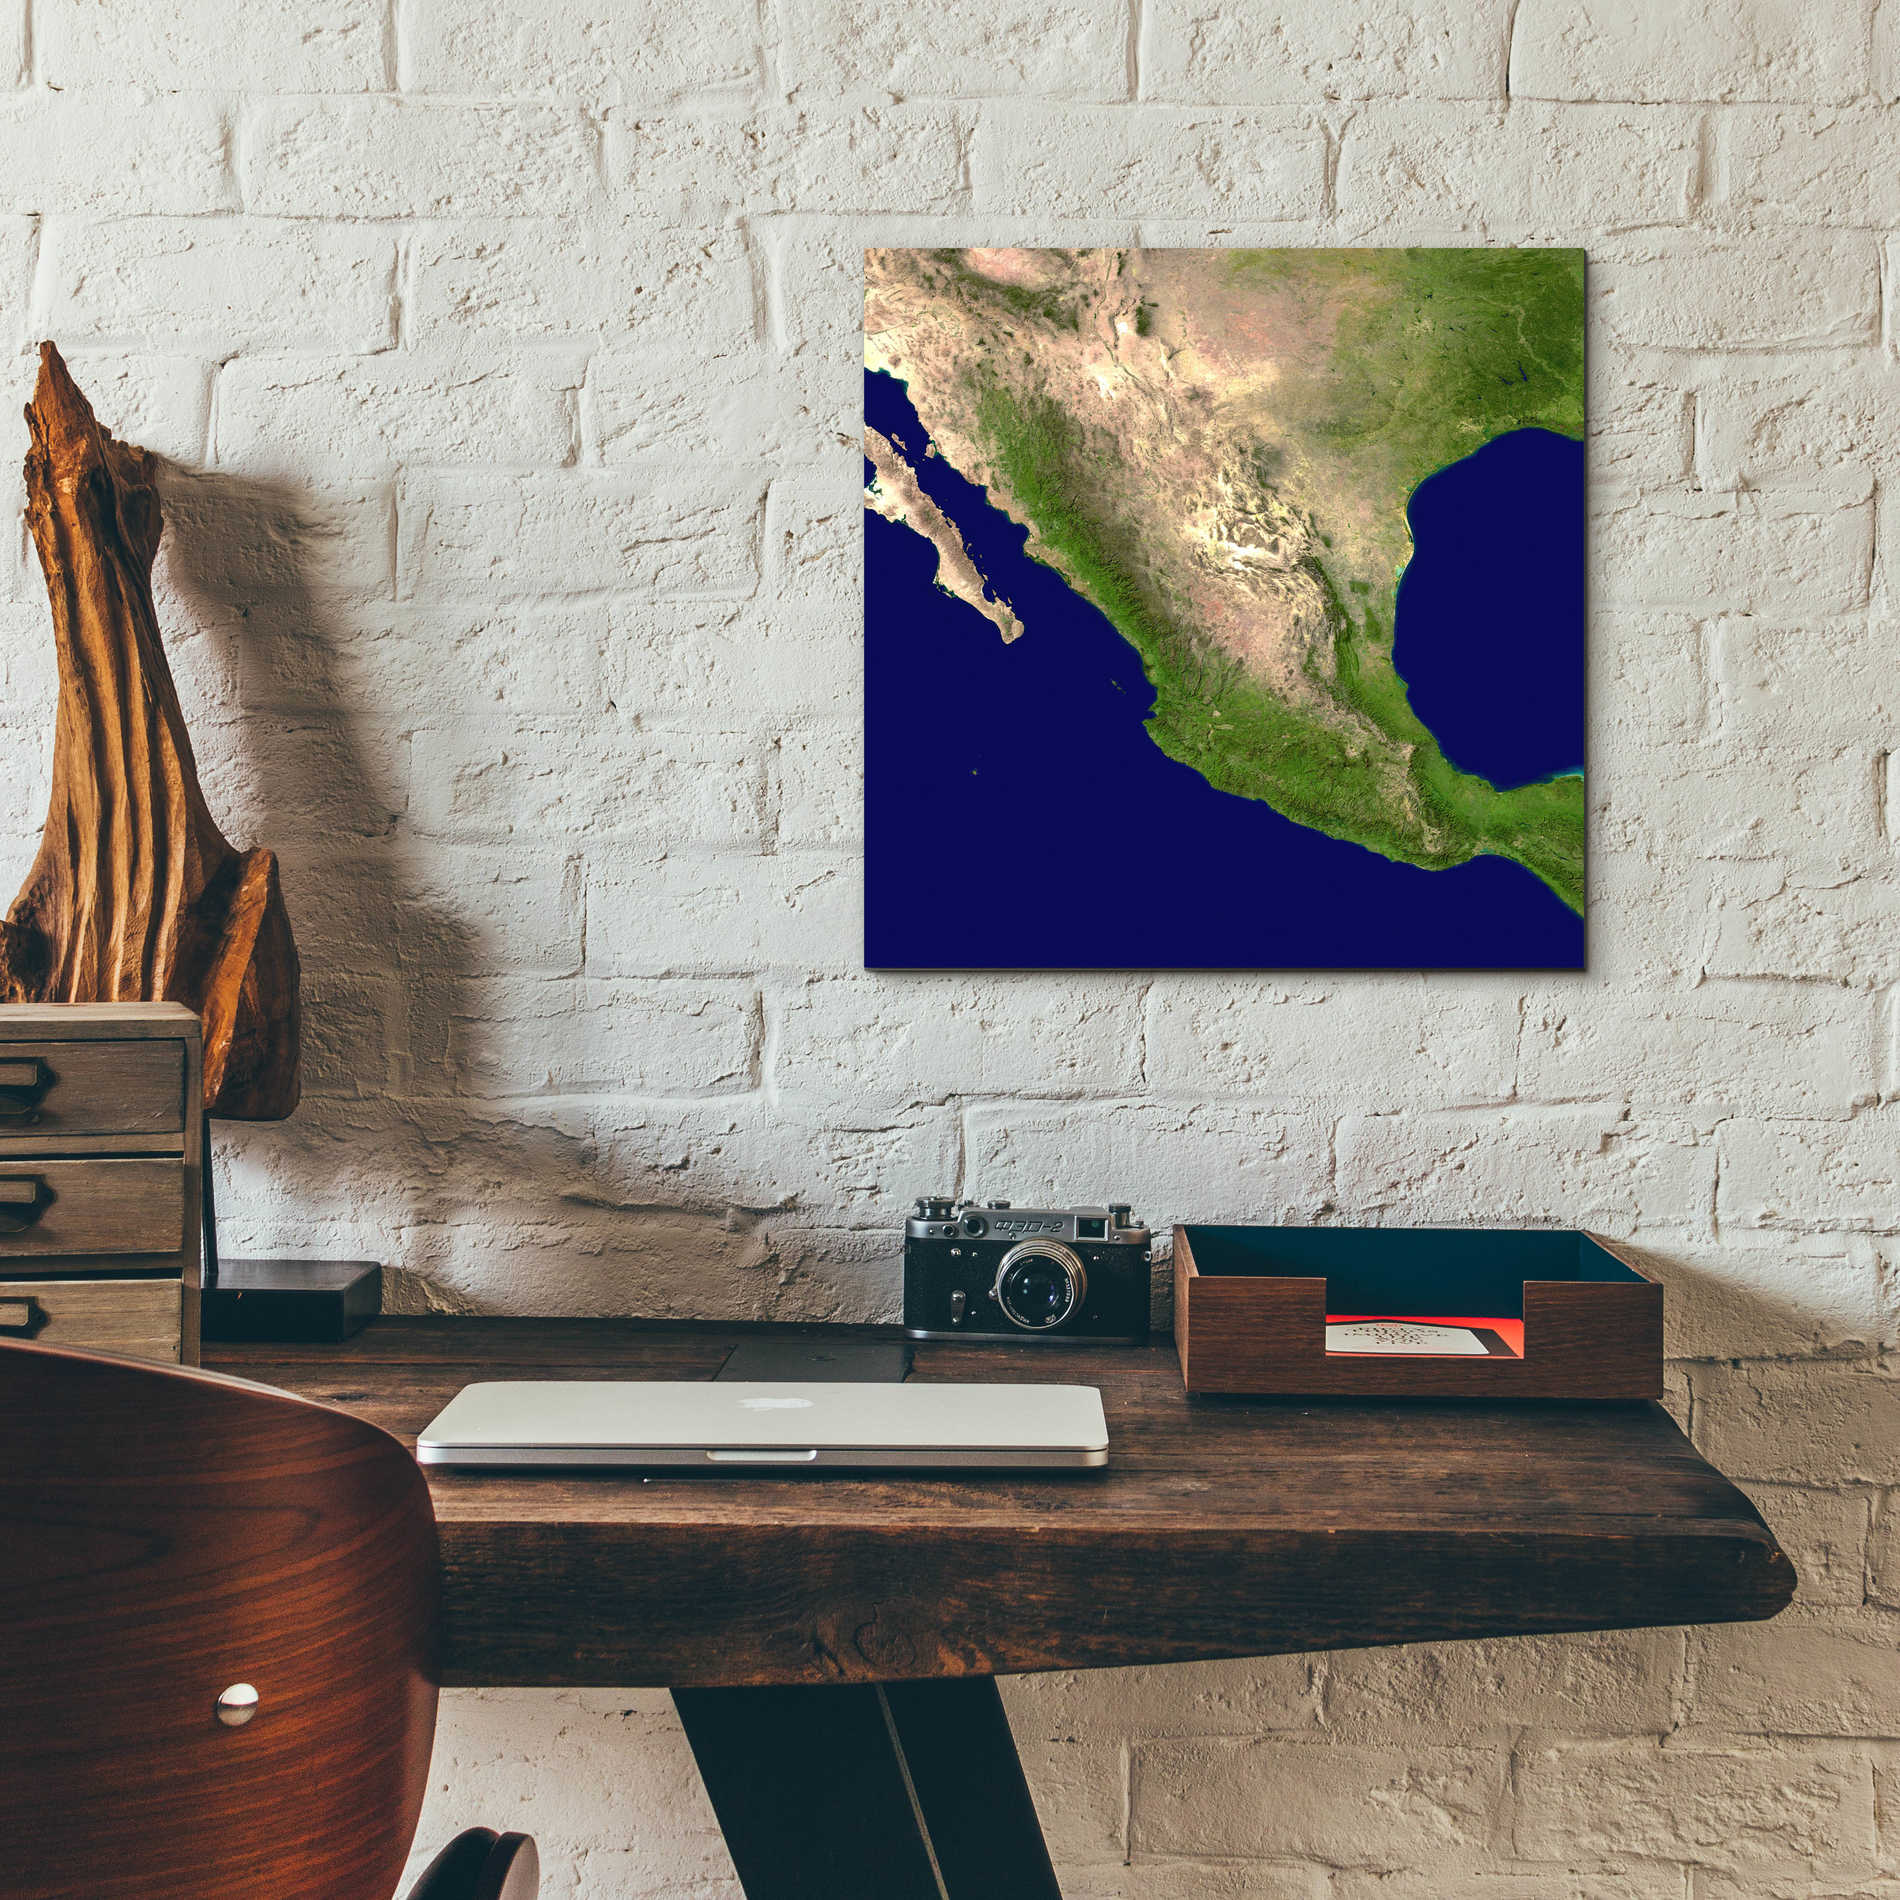 Epic Art 'Earth as Art: Mexico and Central America' Acrylic Glass Wall Art,12x12